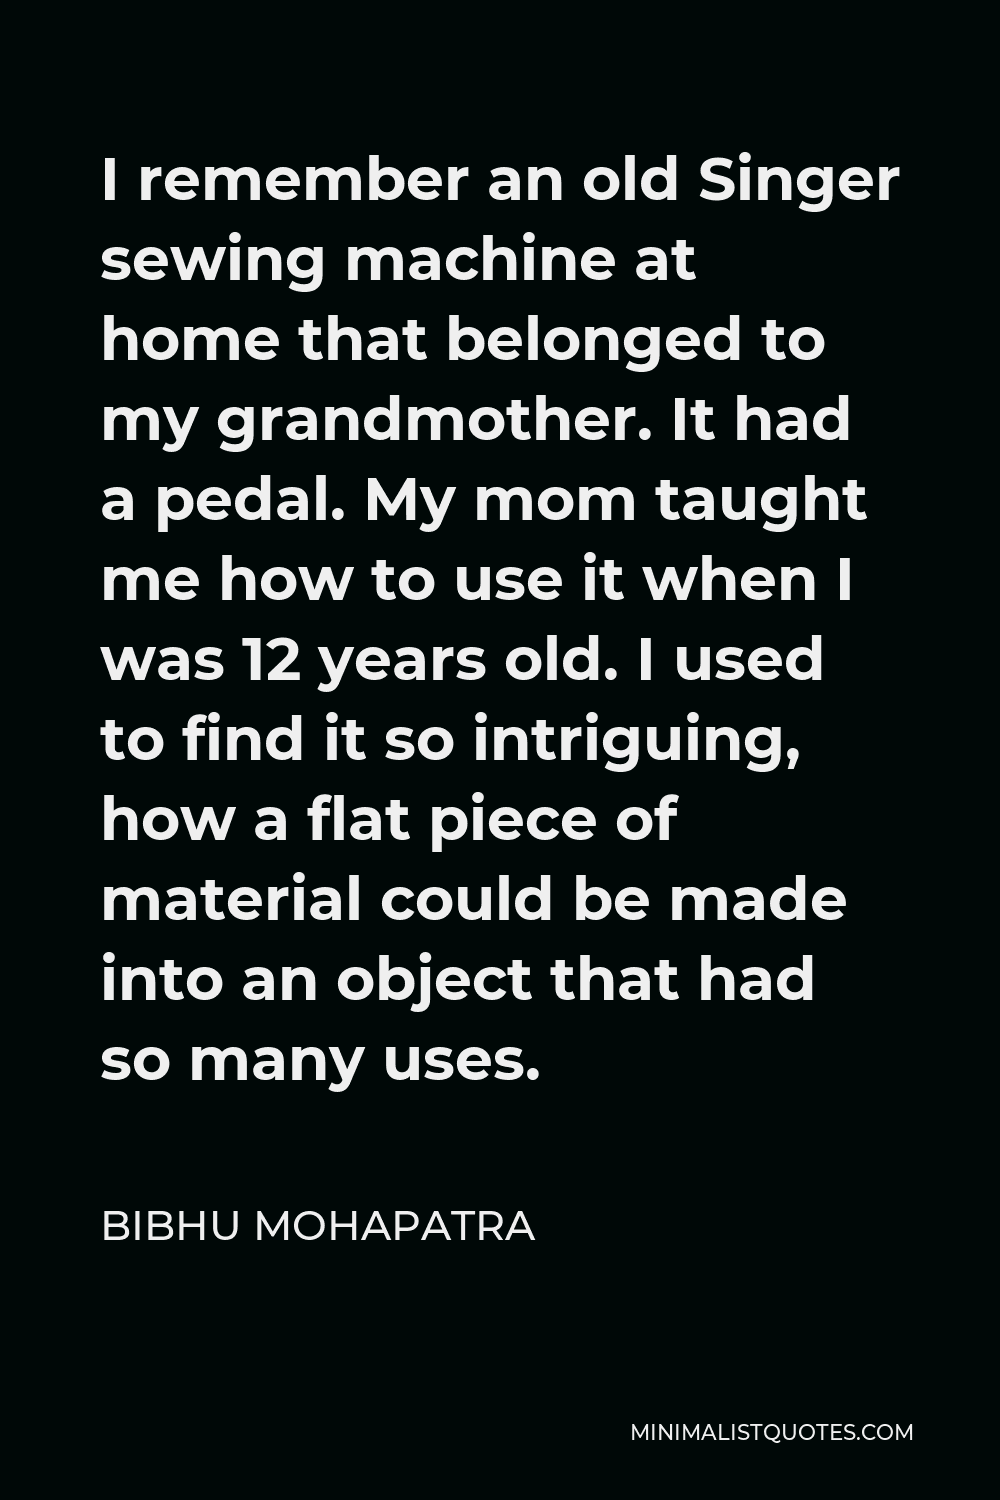 Bibhu Mohapatra Quote - I remember an old Singer sewing machine at home that belonged to my grandmother. It had a pedal. My mom taught me how to use it when I was 12 years old. I used to find it so intriguing, how a flat piece of material could be made into an object that had so many uses.